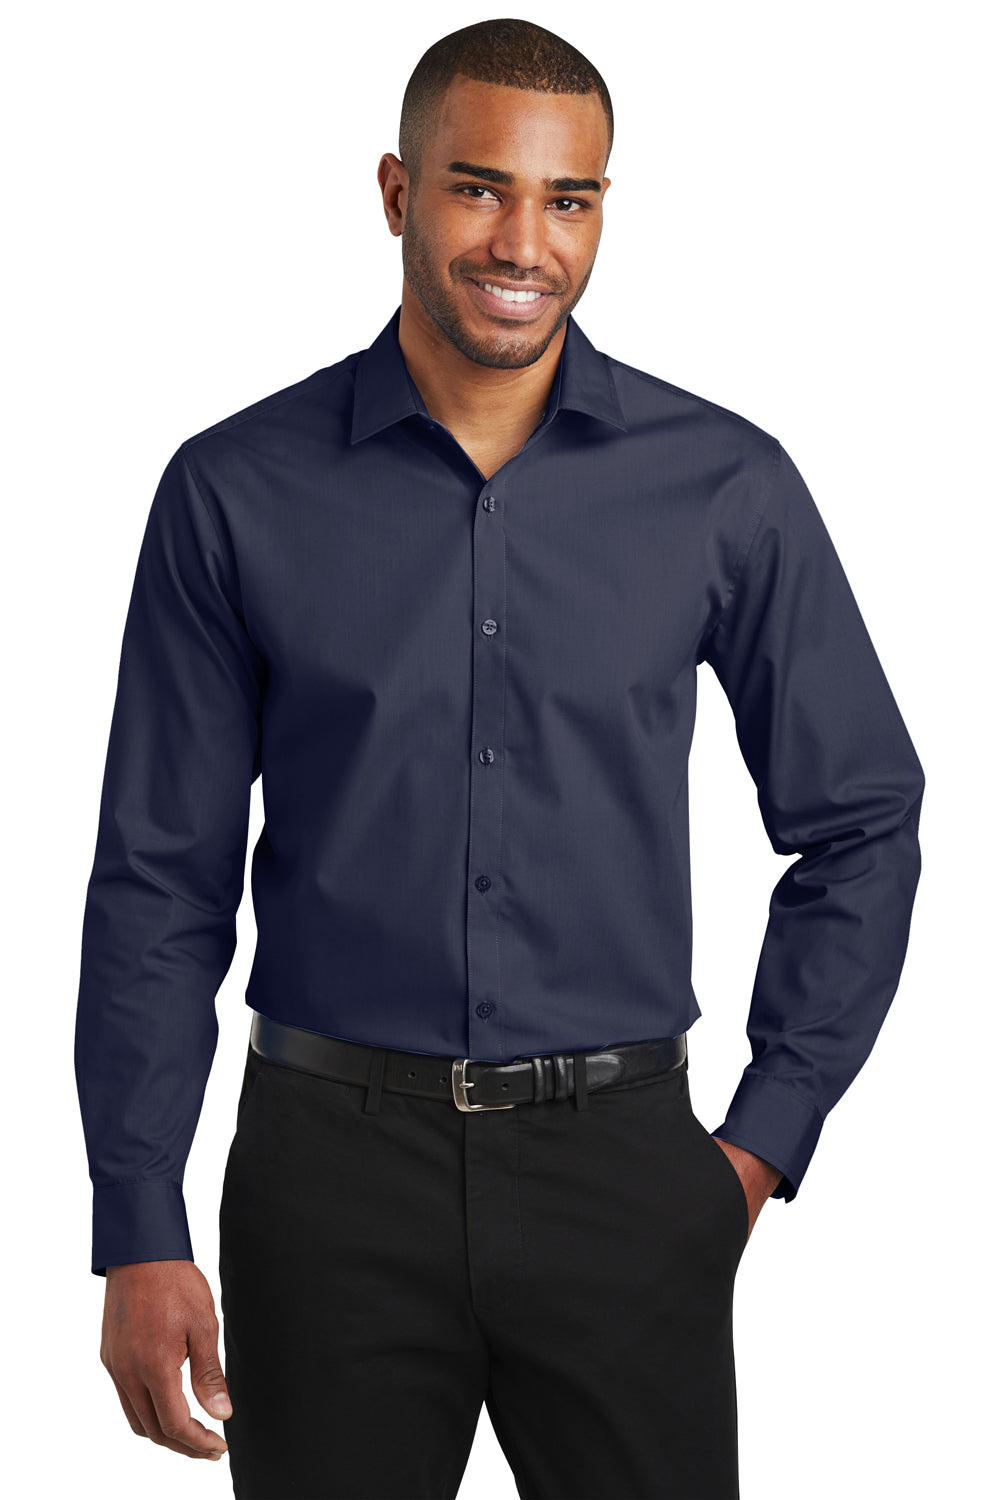 Port Authority W103 Mens Carefree Stain Resistant Long Sleeve Button Down Shirt Navy Blue Front